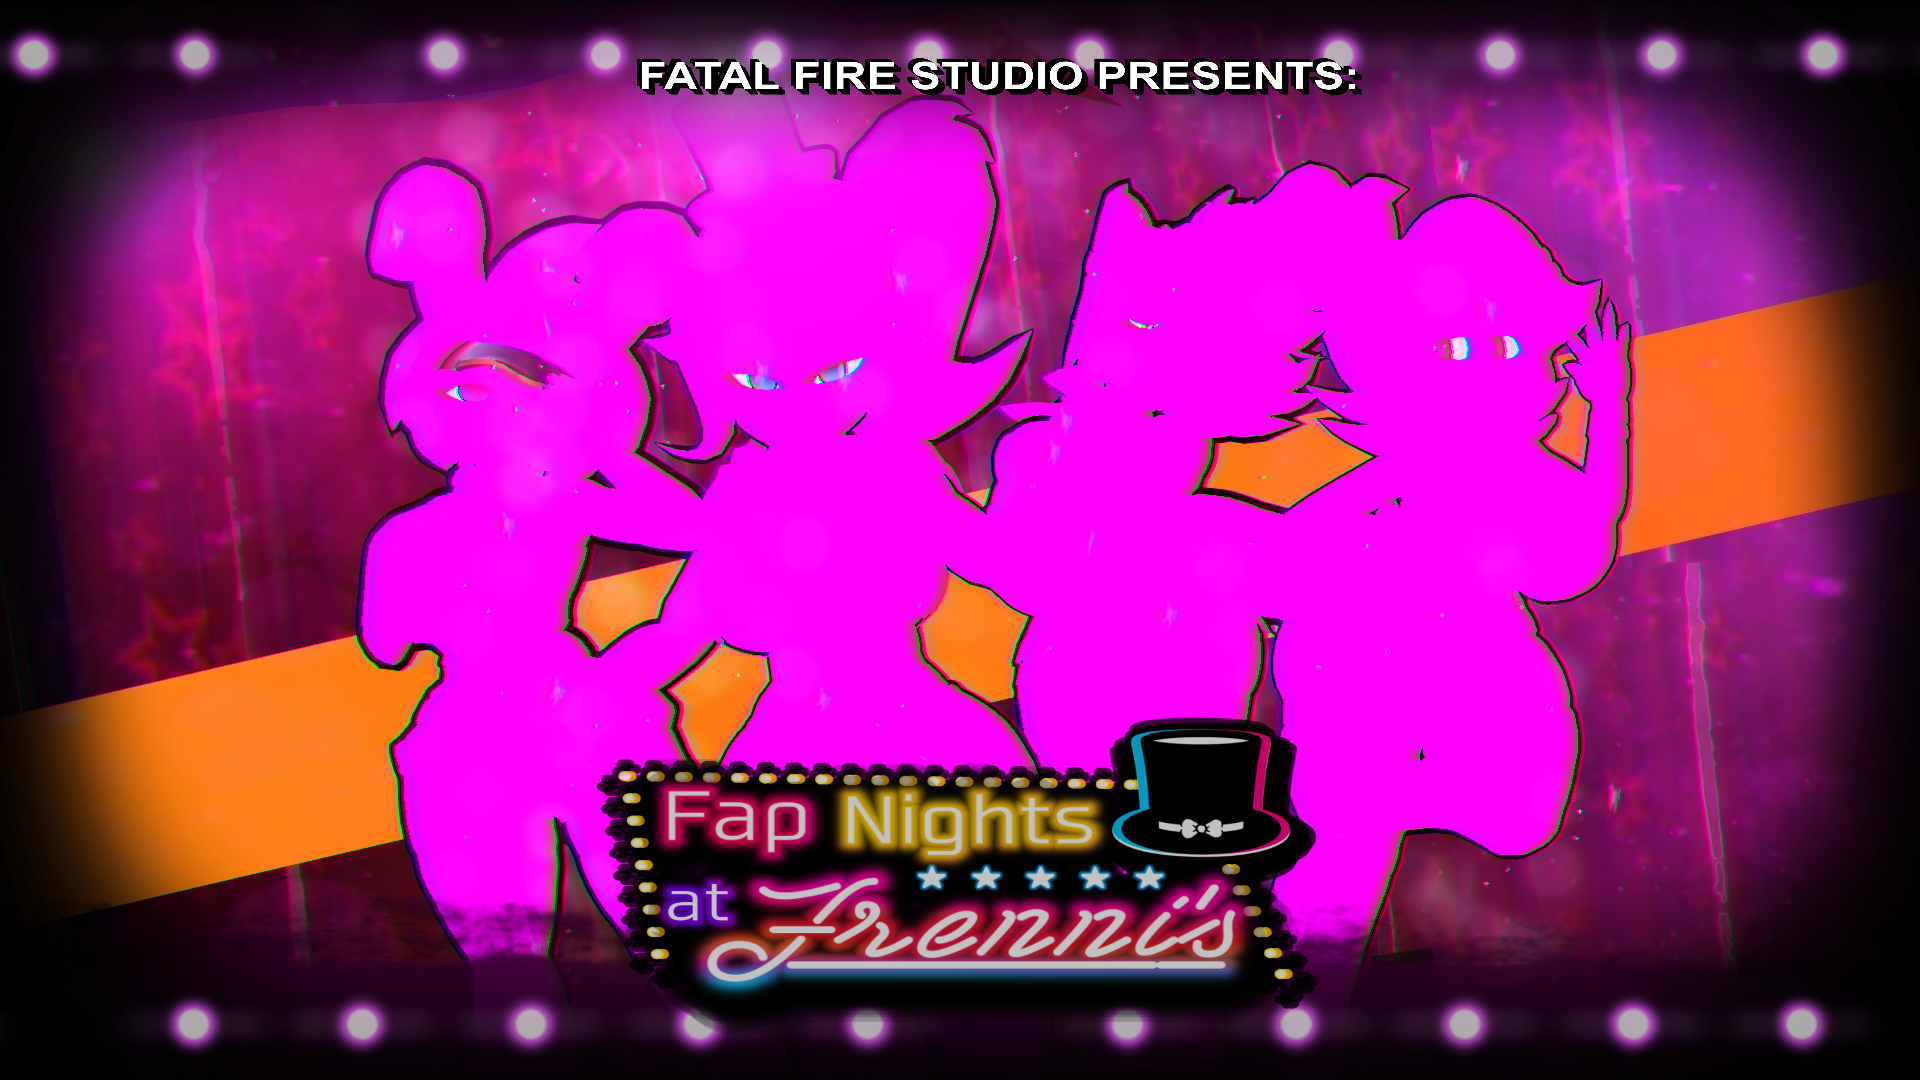 Comments 1982 To 1943 Of 4595 Fap Nights At Frennis Night Club By Fatal Fire